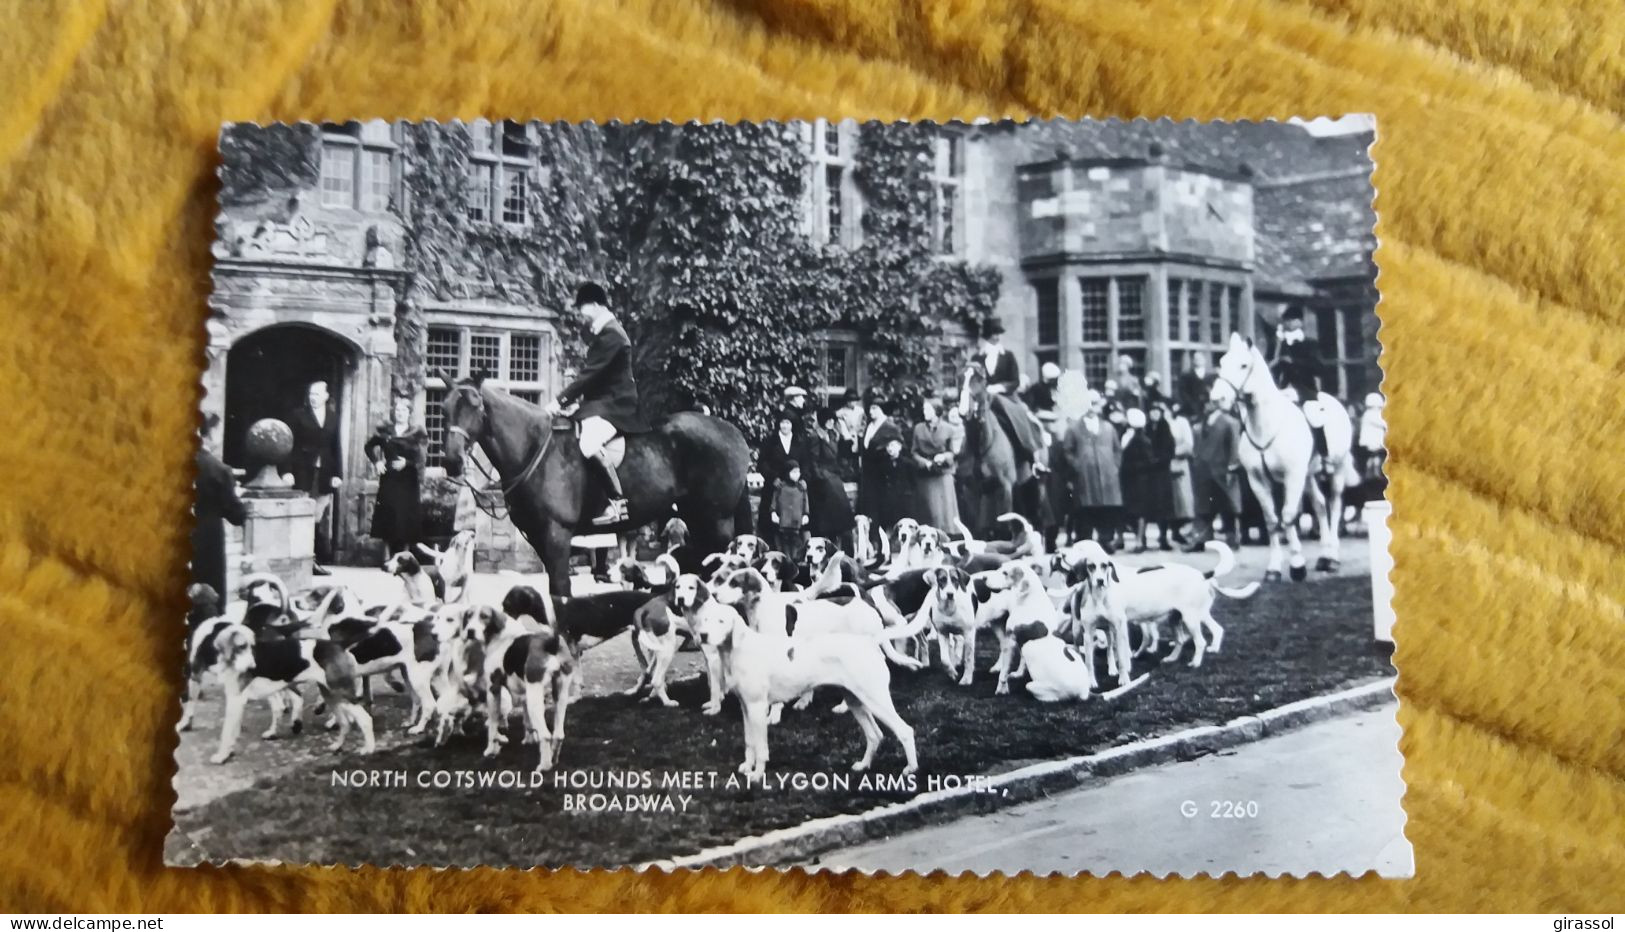 CPSM CHEVAL CHEVAUX HORSE HORSES CHASSE A COURRE NORTH COTSWOLD HOUNDS MEET A FLYGON ARMS HOTEL BROADWAY - Chevaux